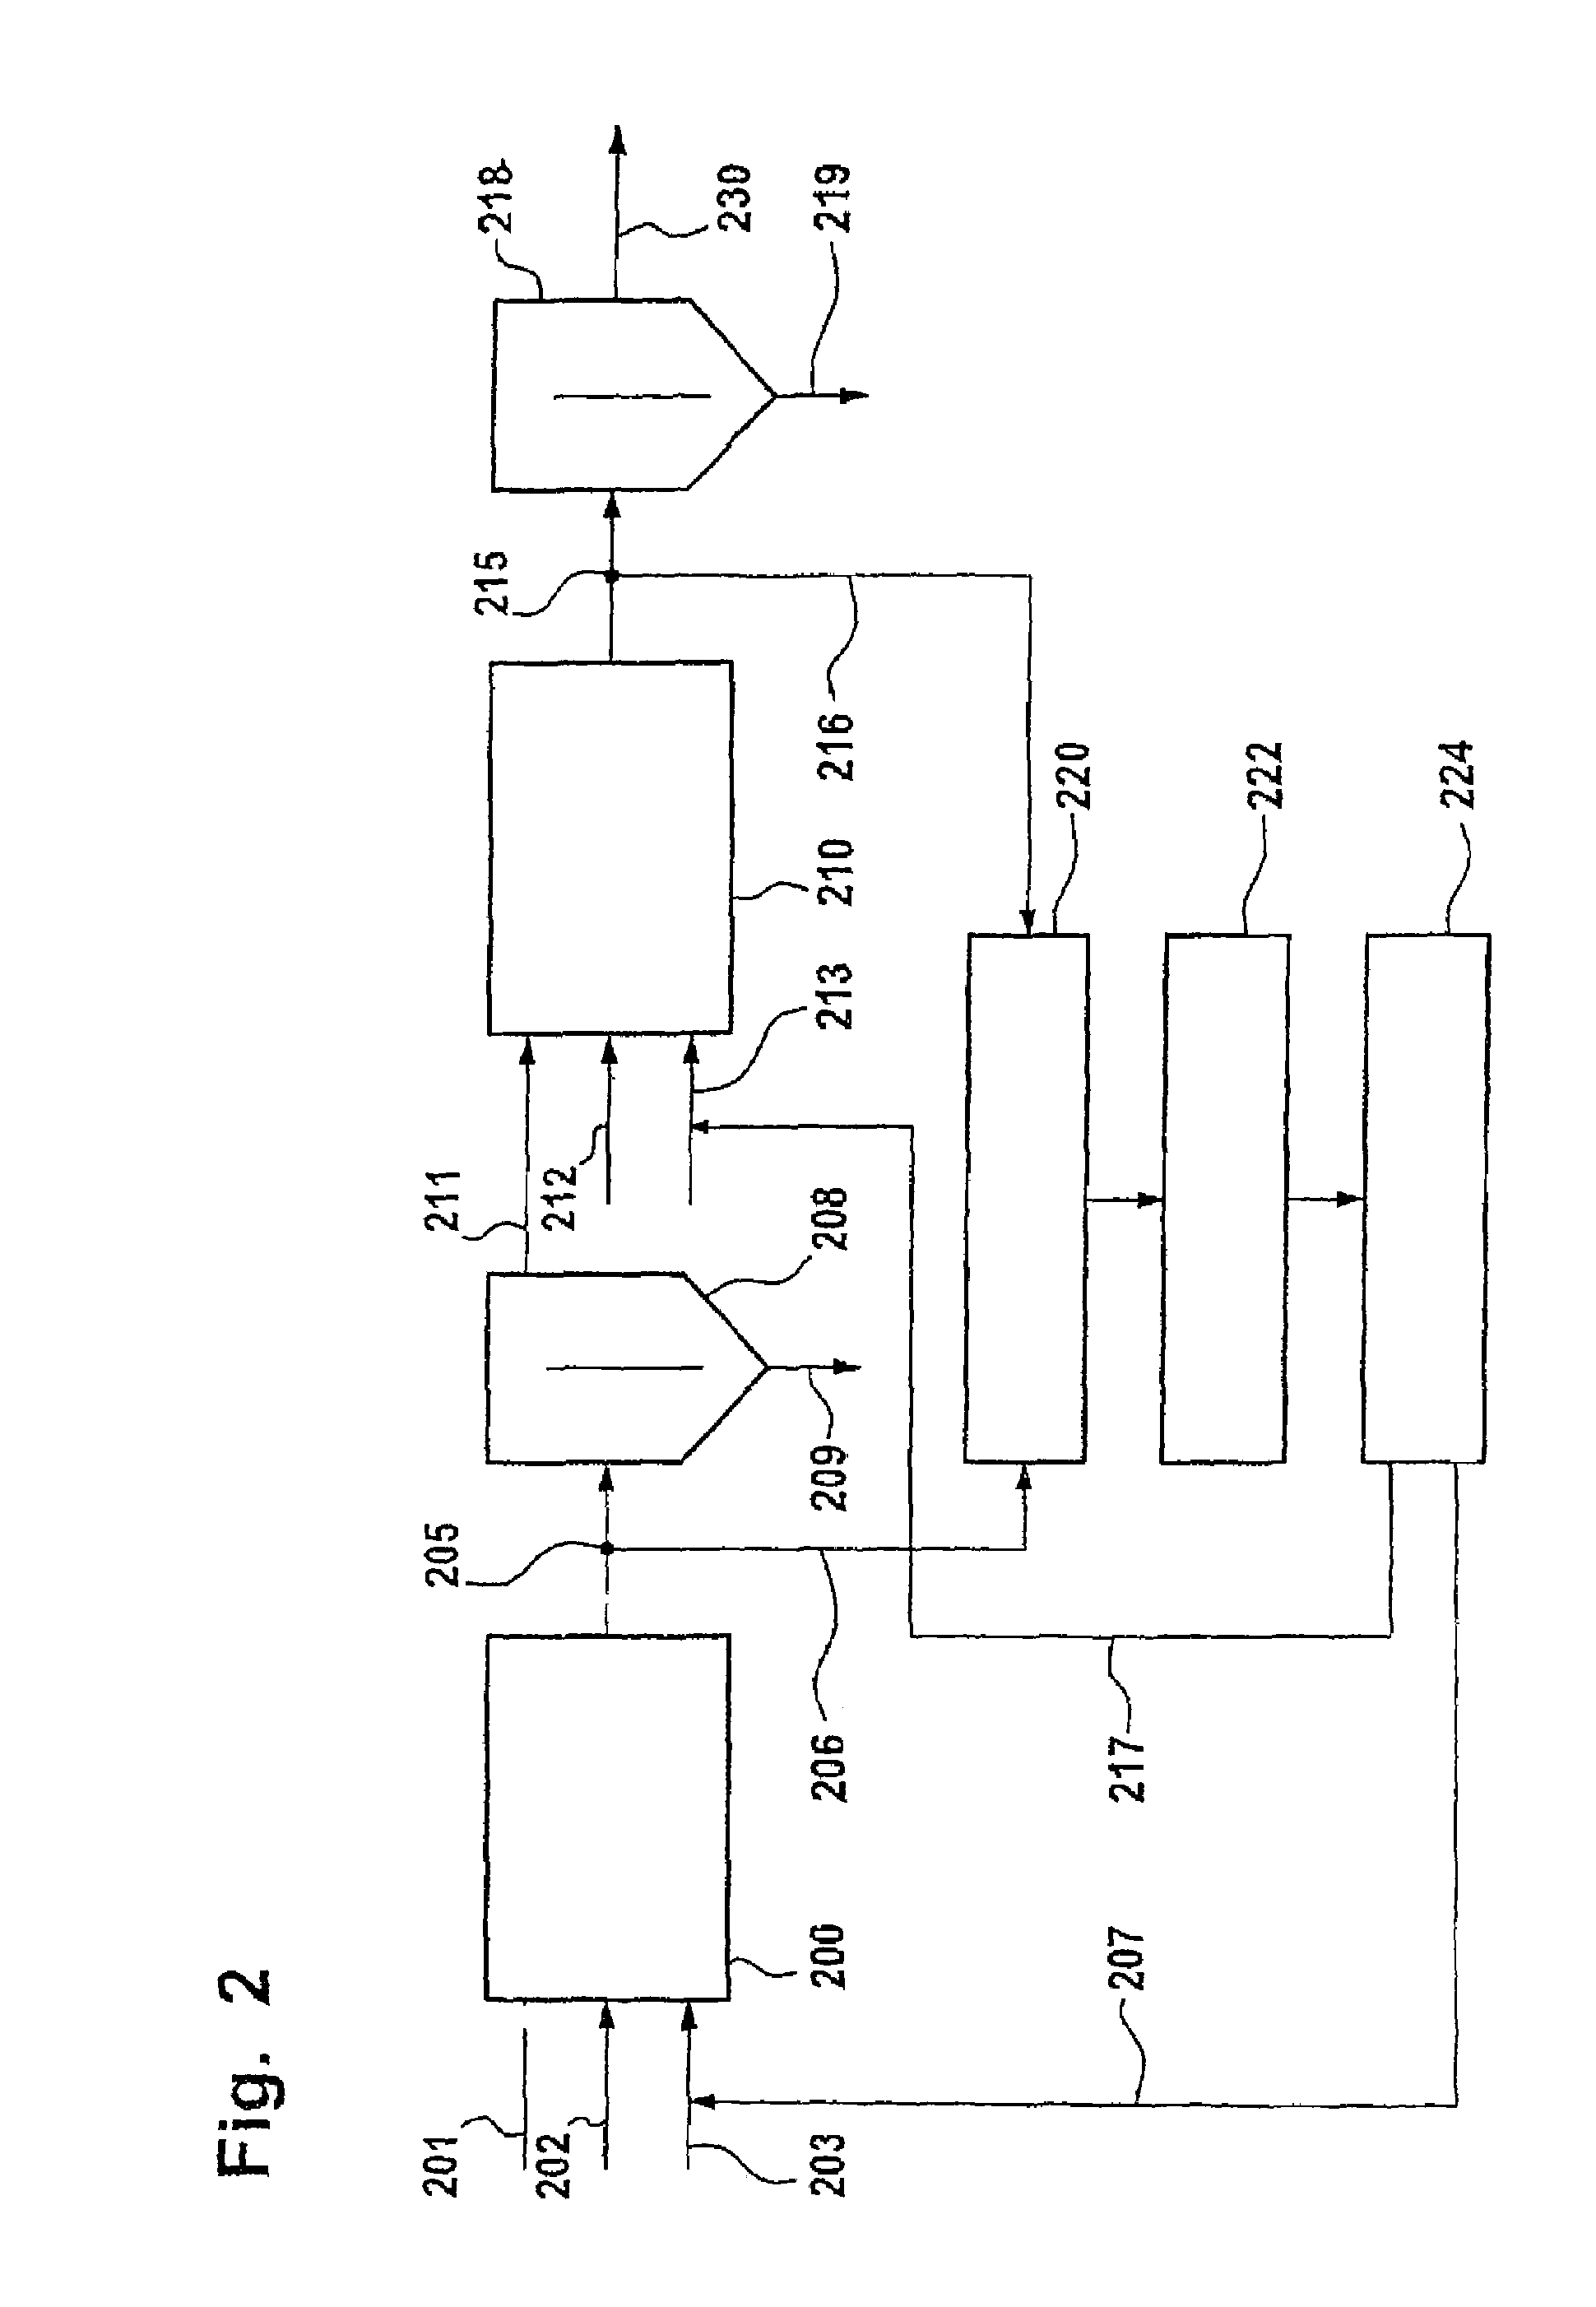 Process for monitoring and controlling nitrating processes with the aid of an online spectrometer